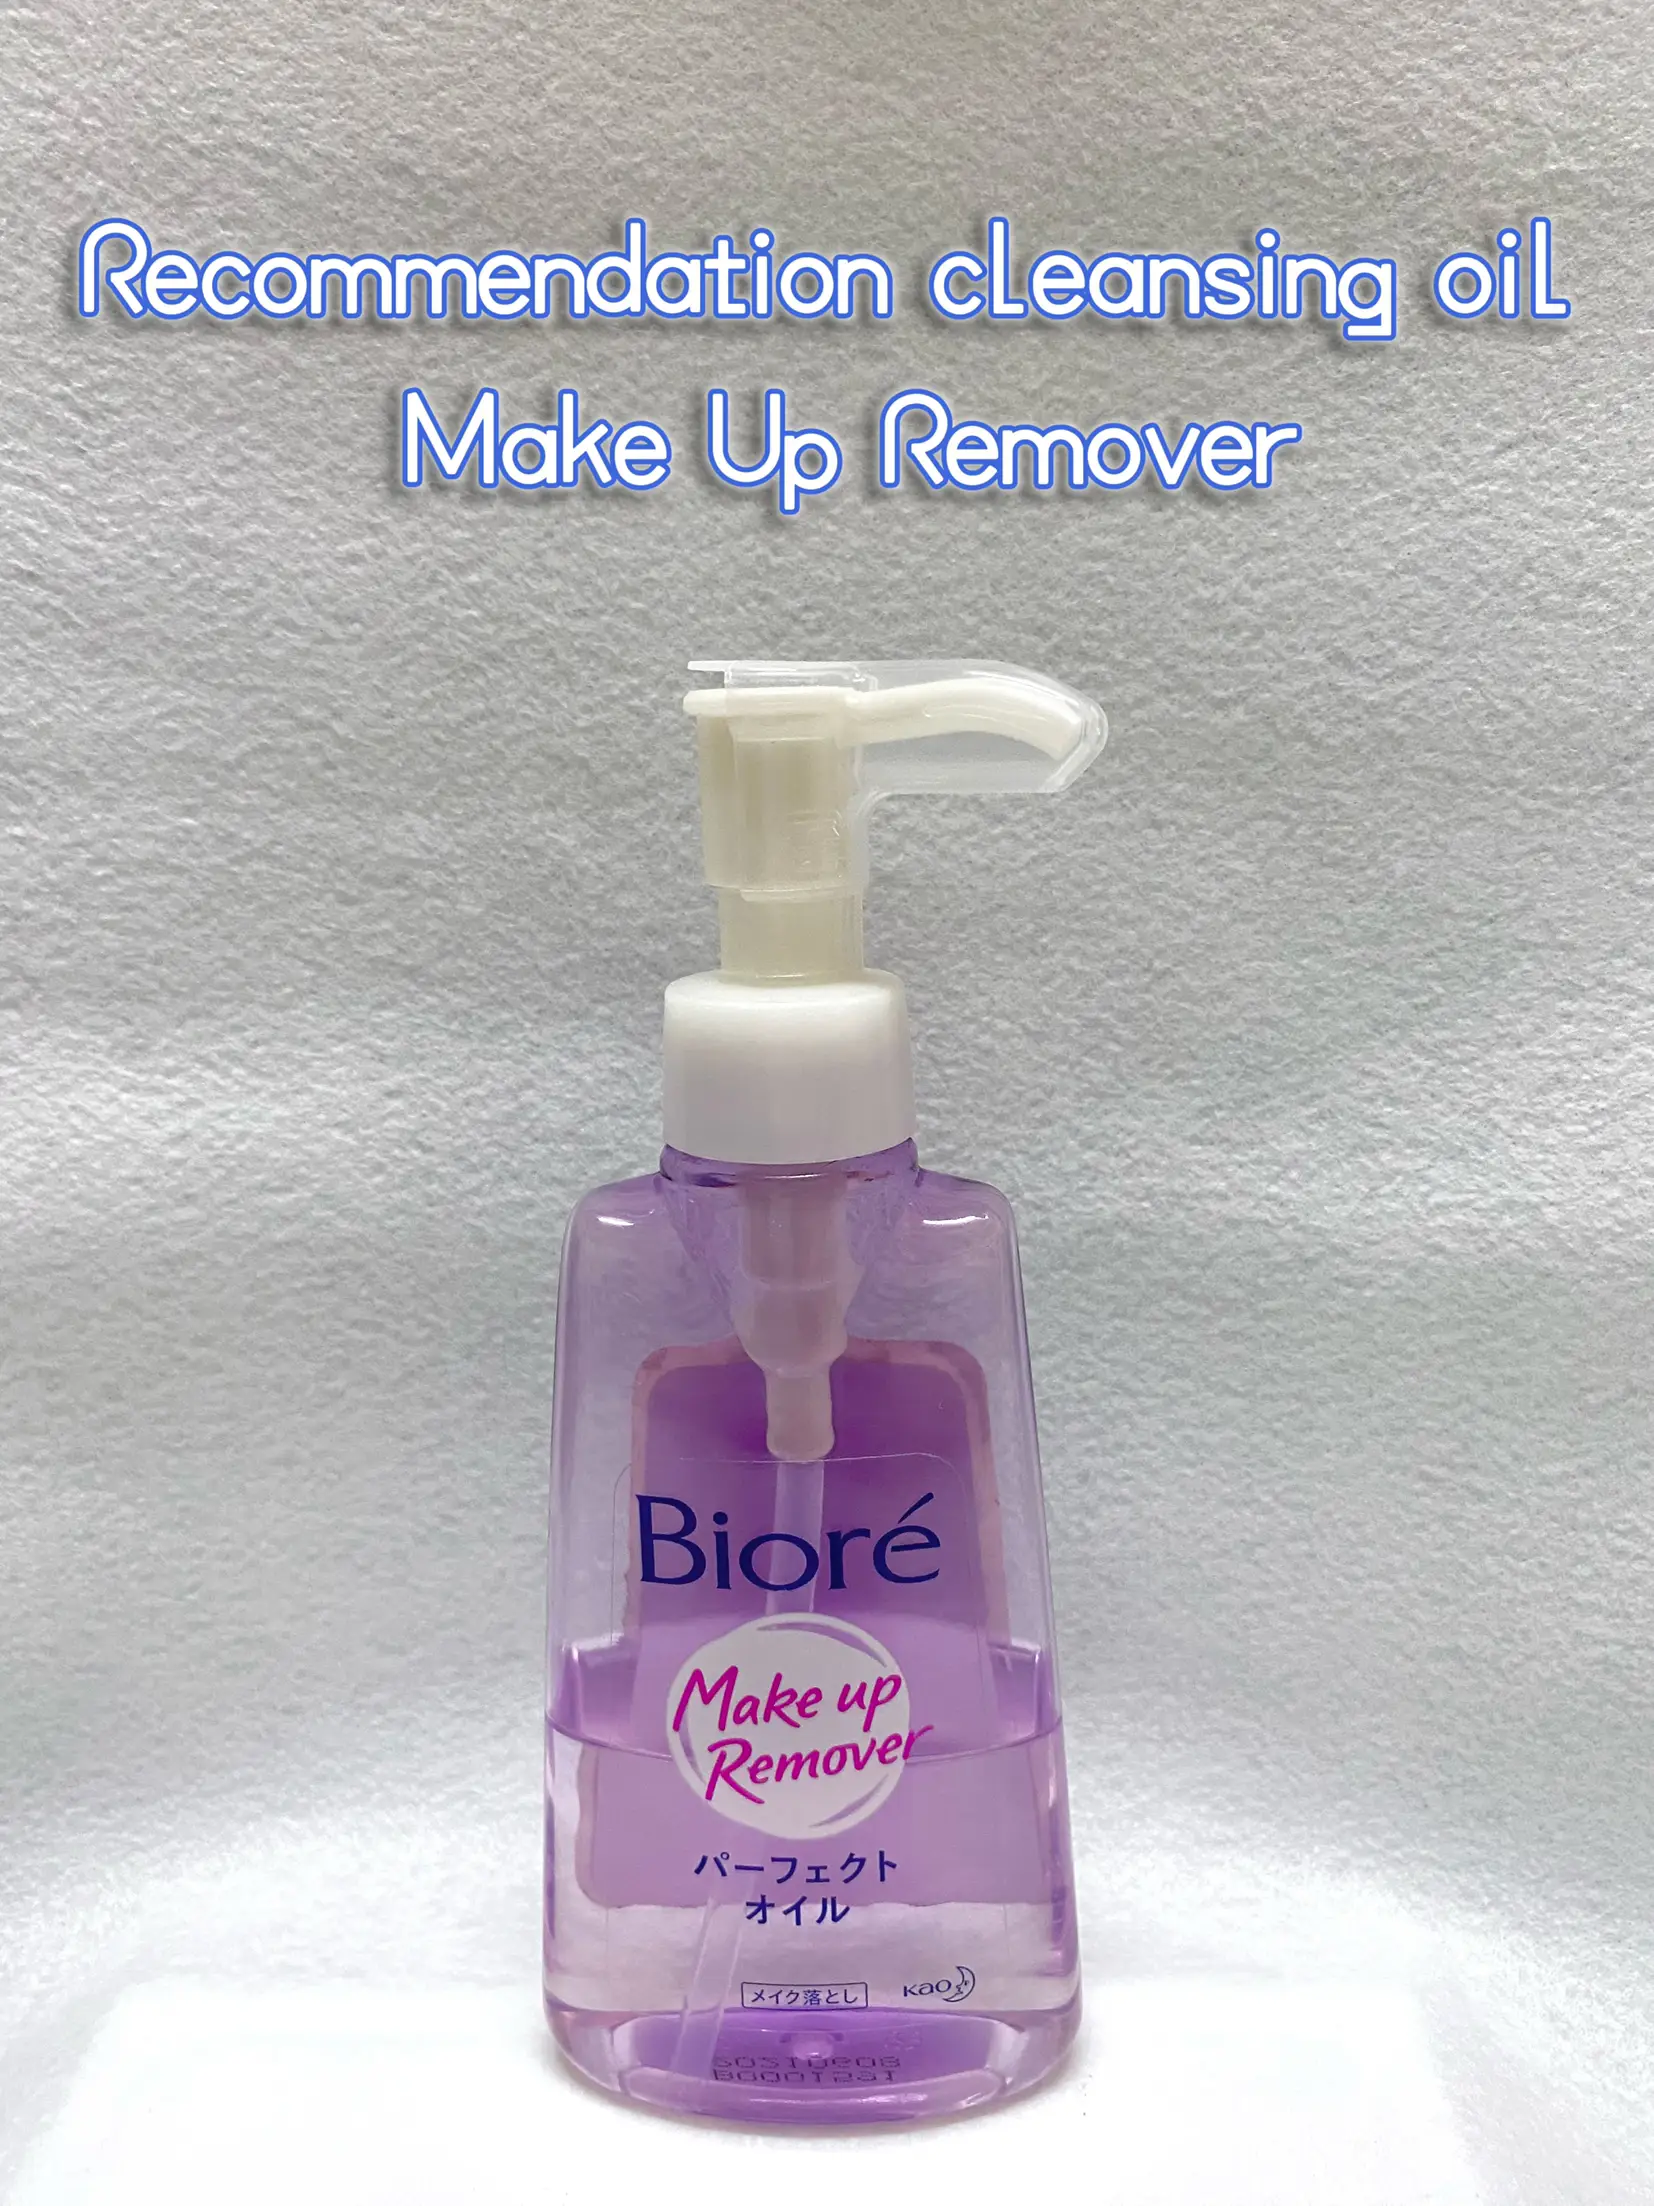 Recommendation Cleansing Oil Make Up Remover